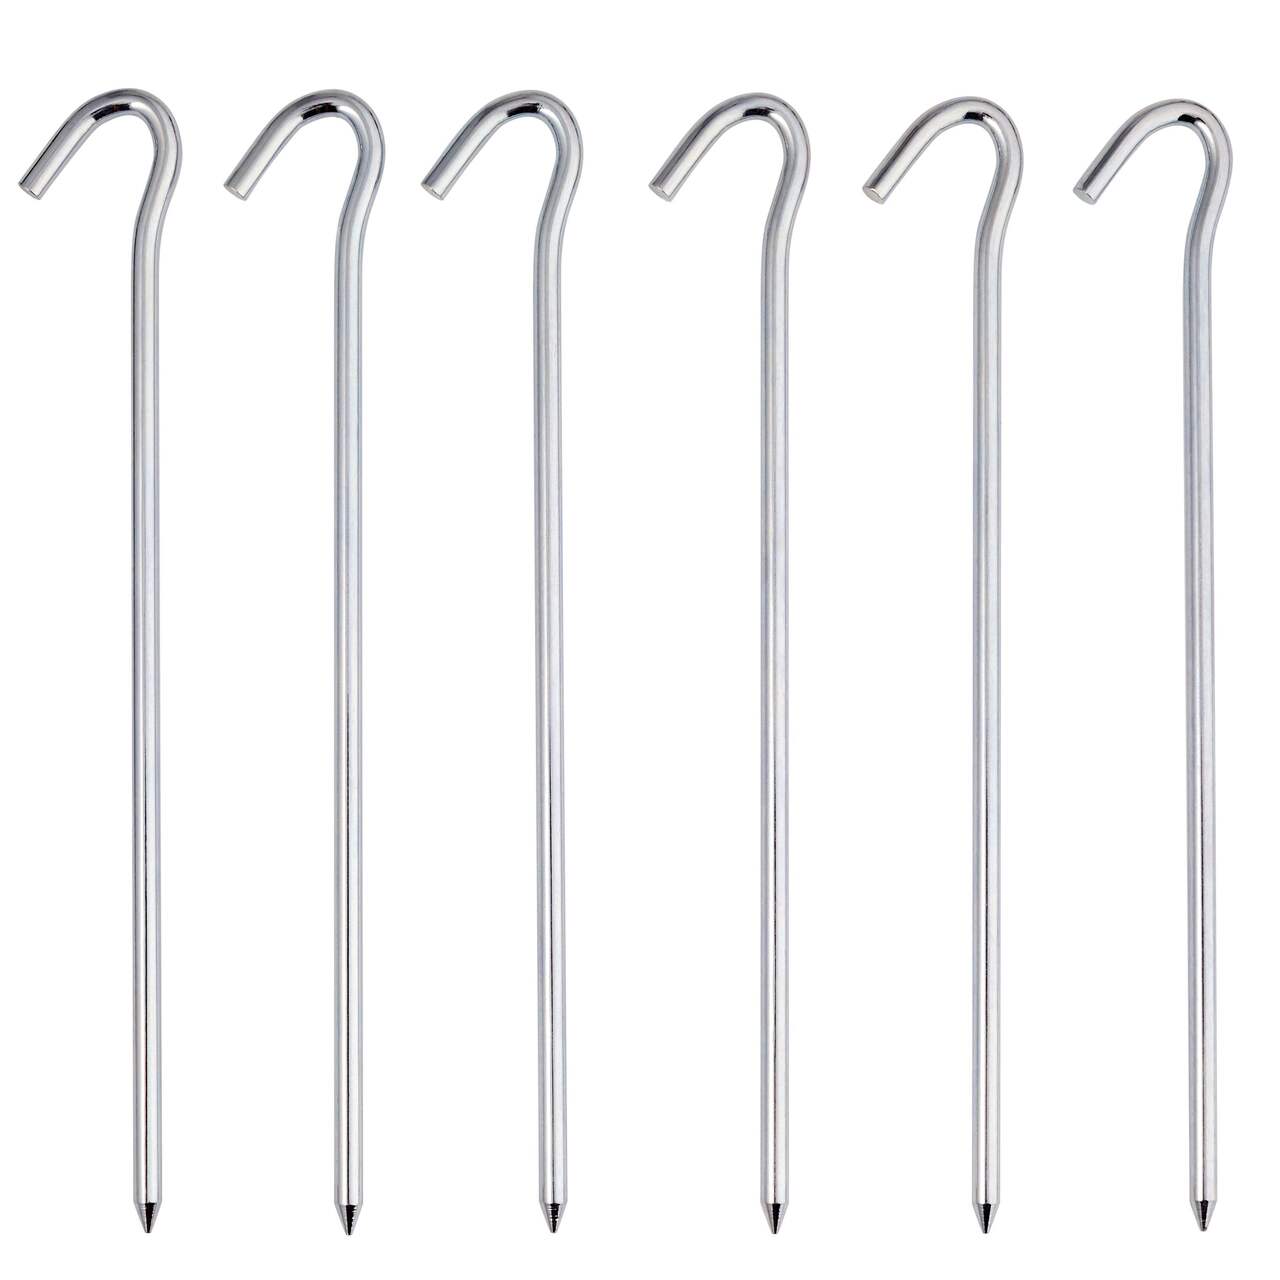 Woods Steel Hook-Top Tent Pegs/Stakes For Small Camping Tents